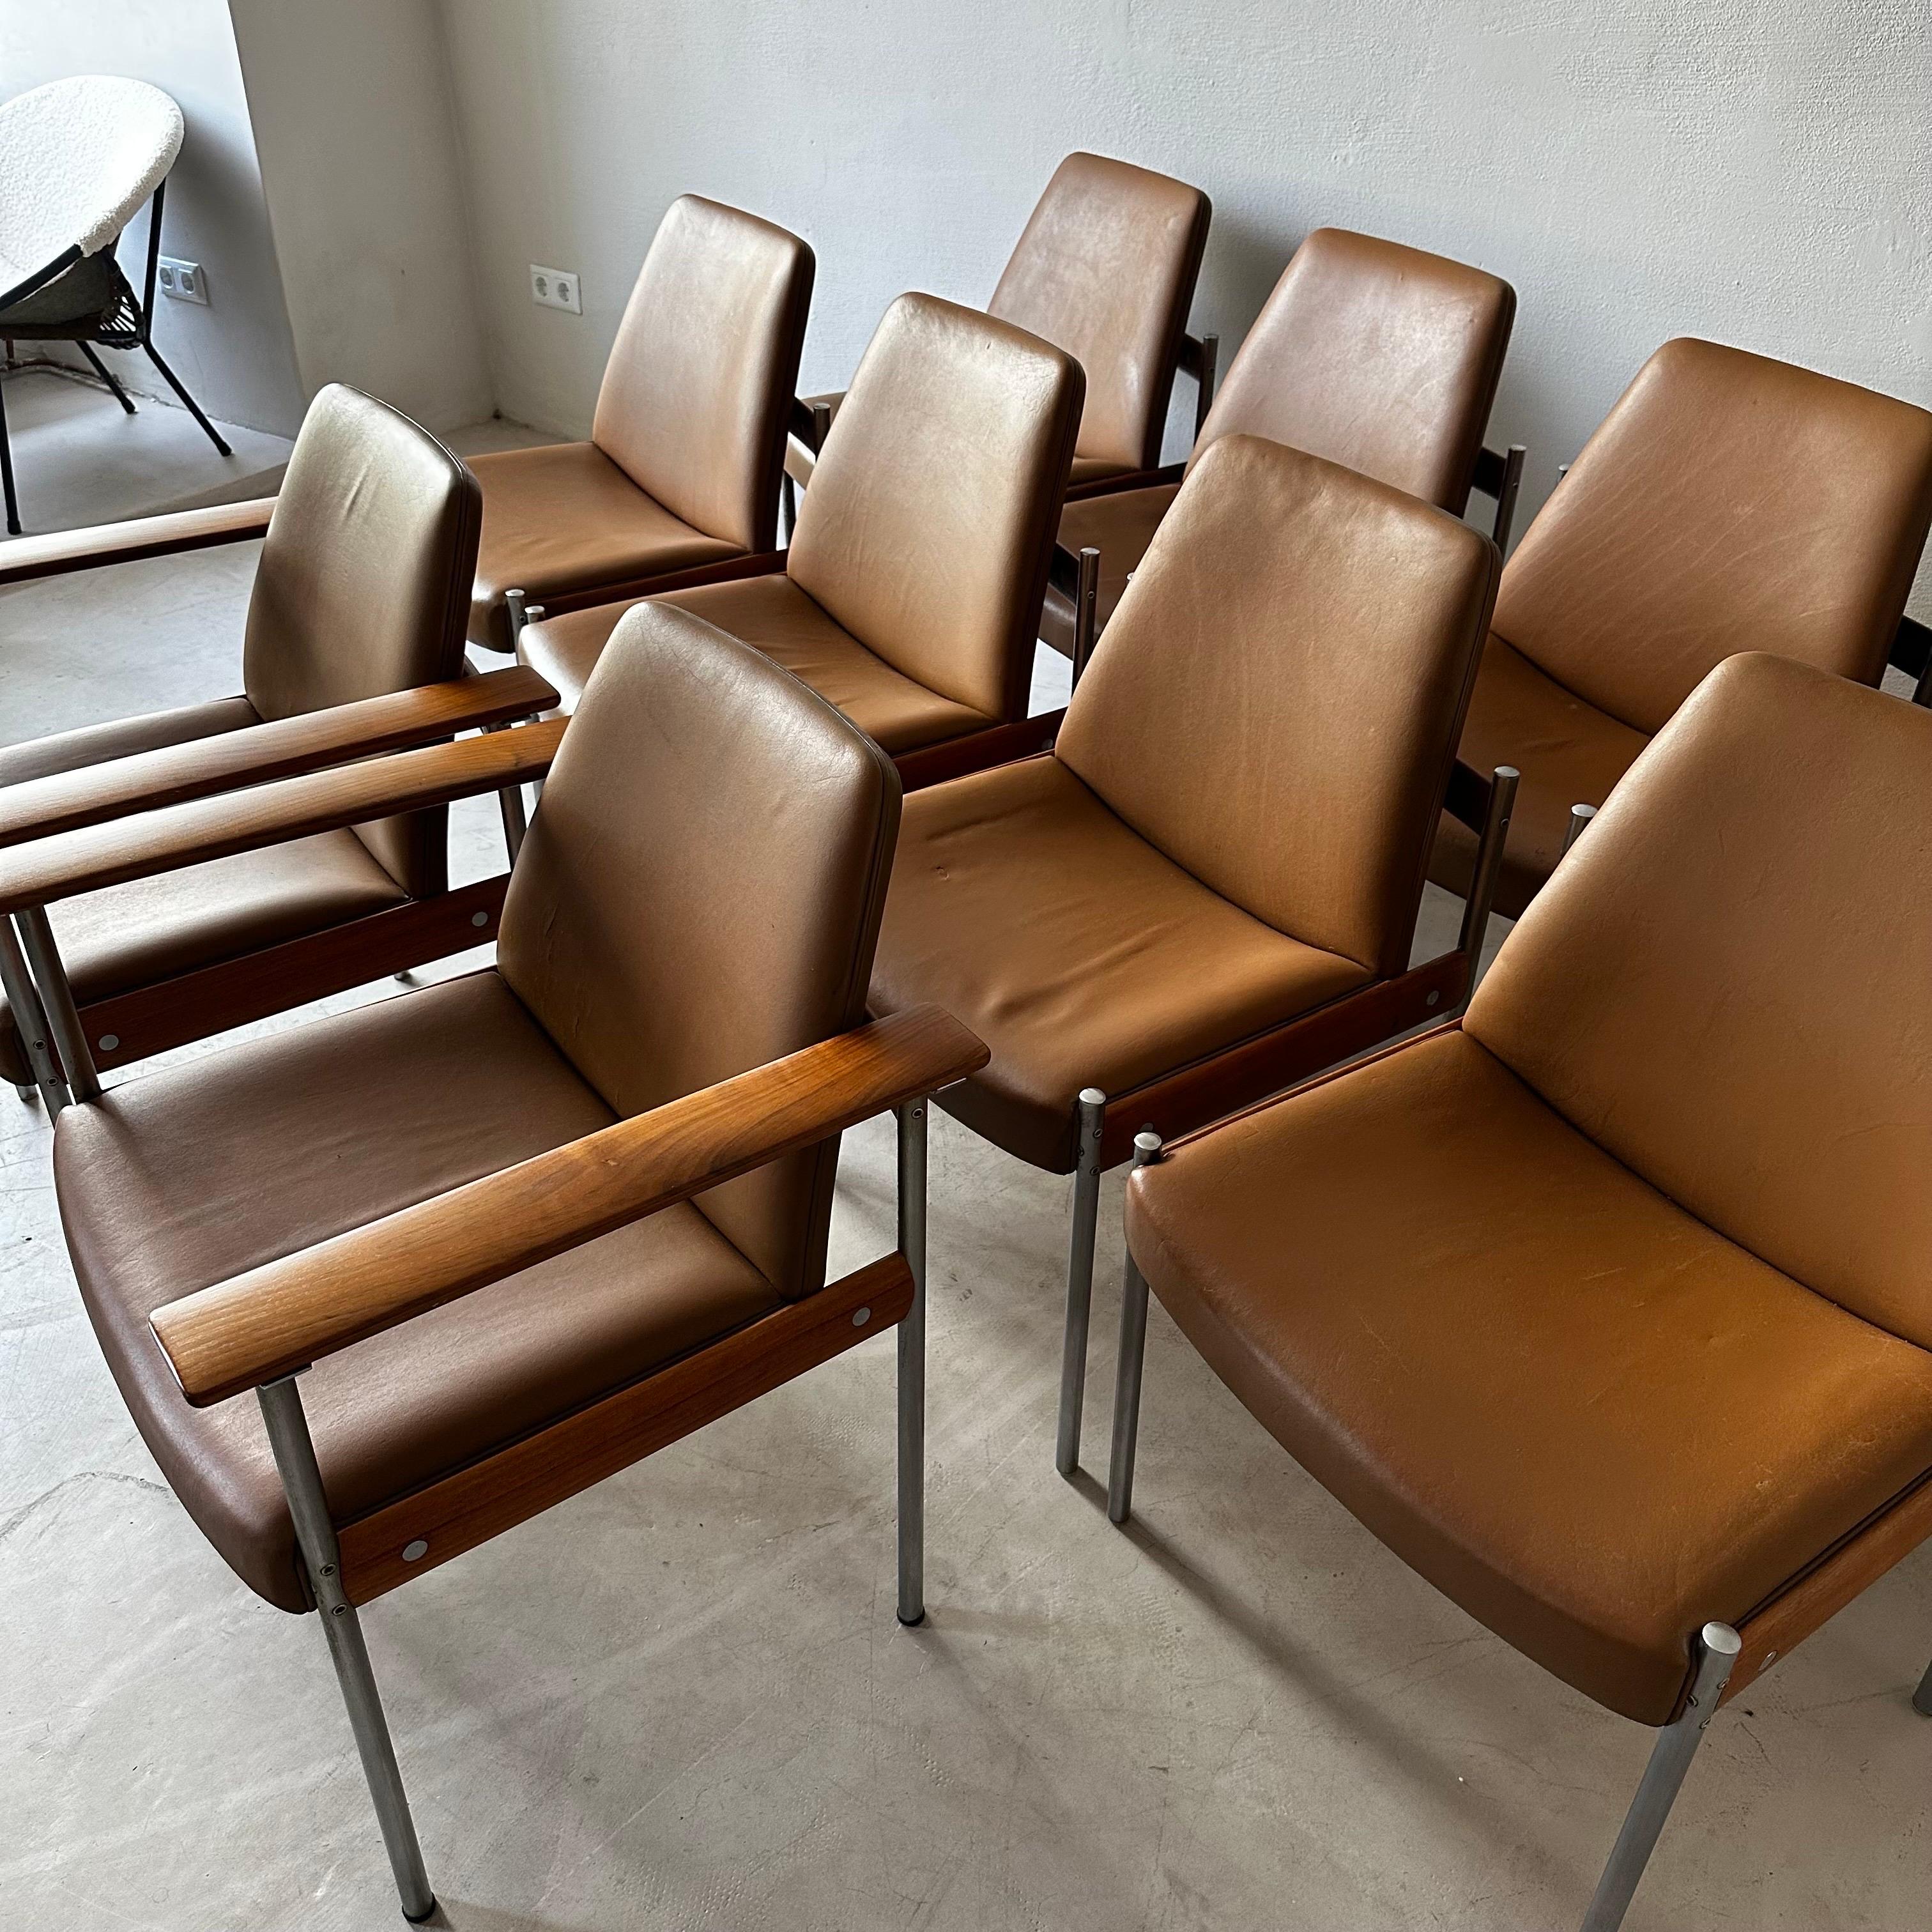 Sven Ivar Dysthe Large Set of 10 Chairs in Cognac Leather and Walnut For Sale 3